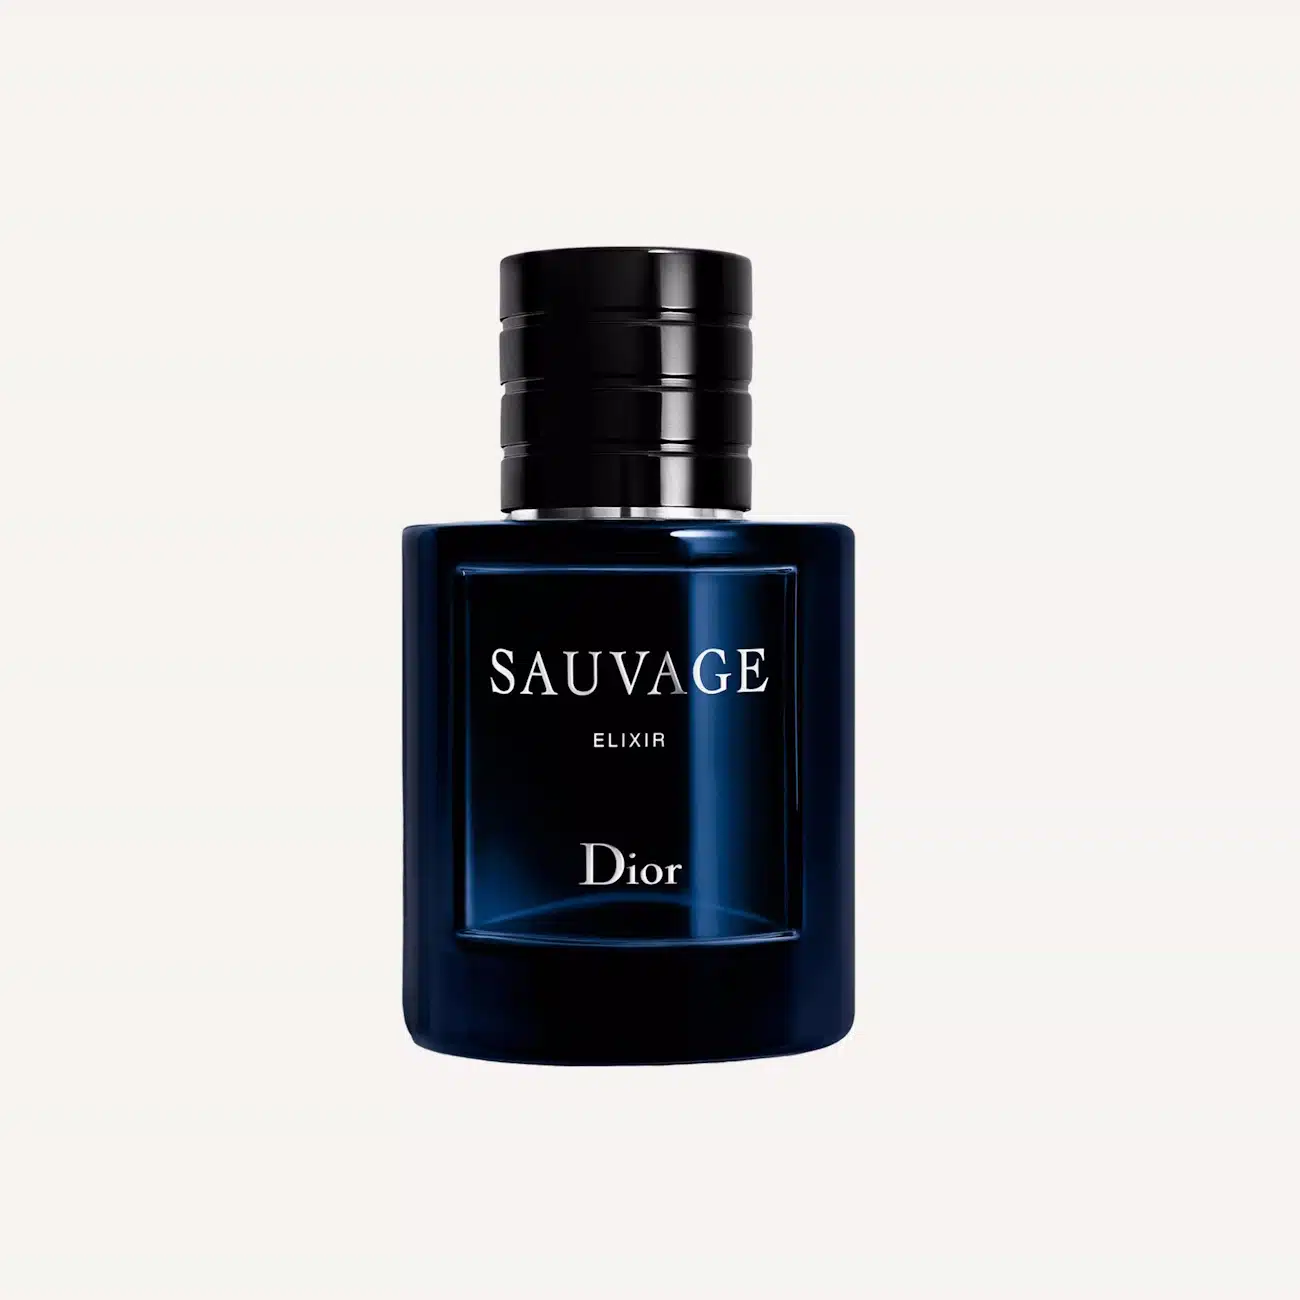 A bottle of Dior Sauvage Elixir cologne